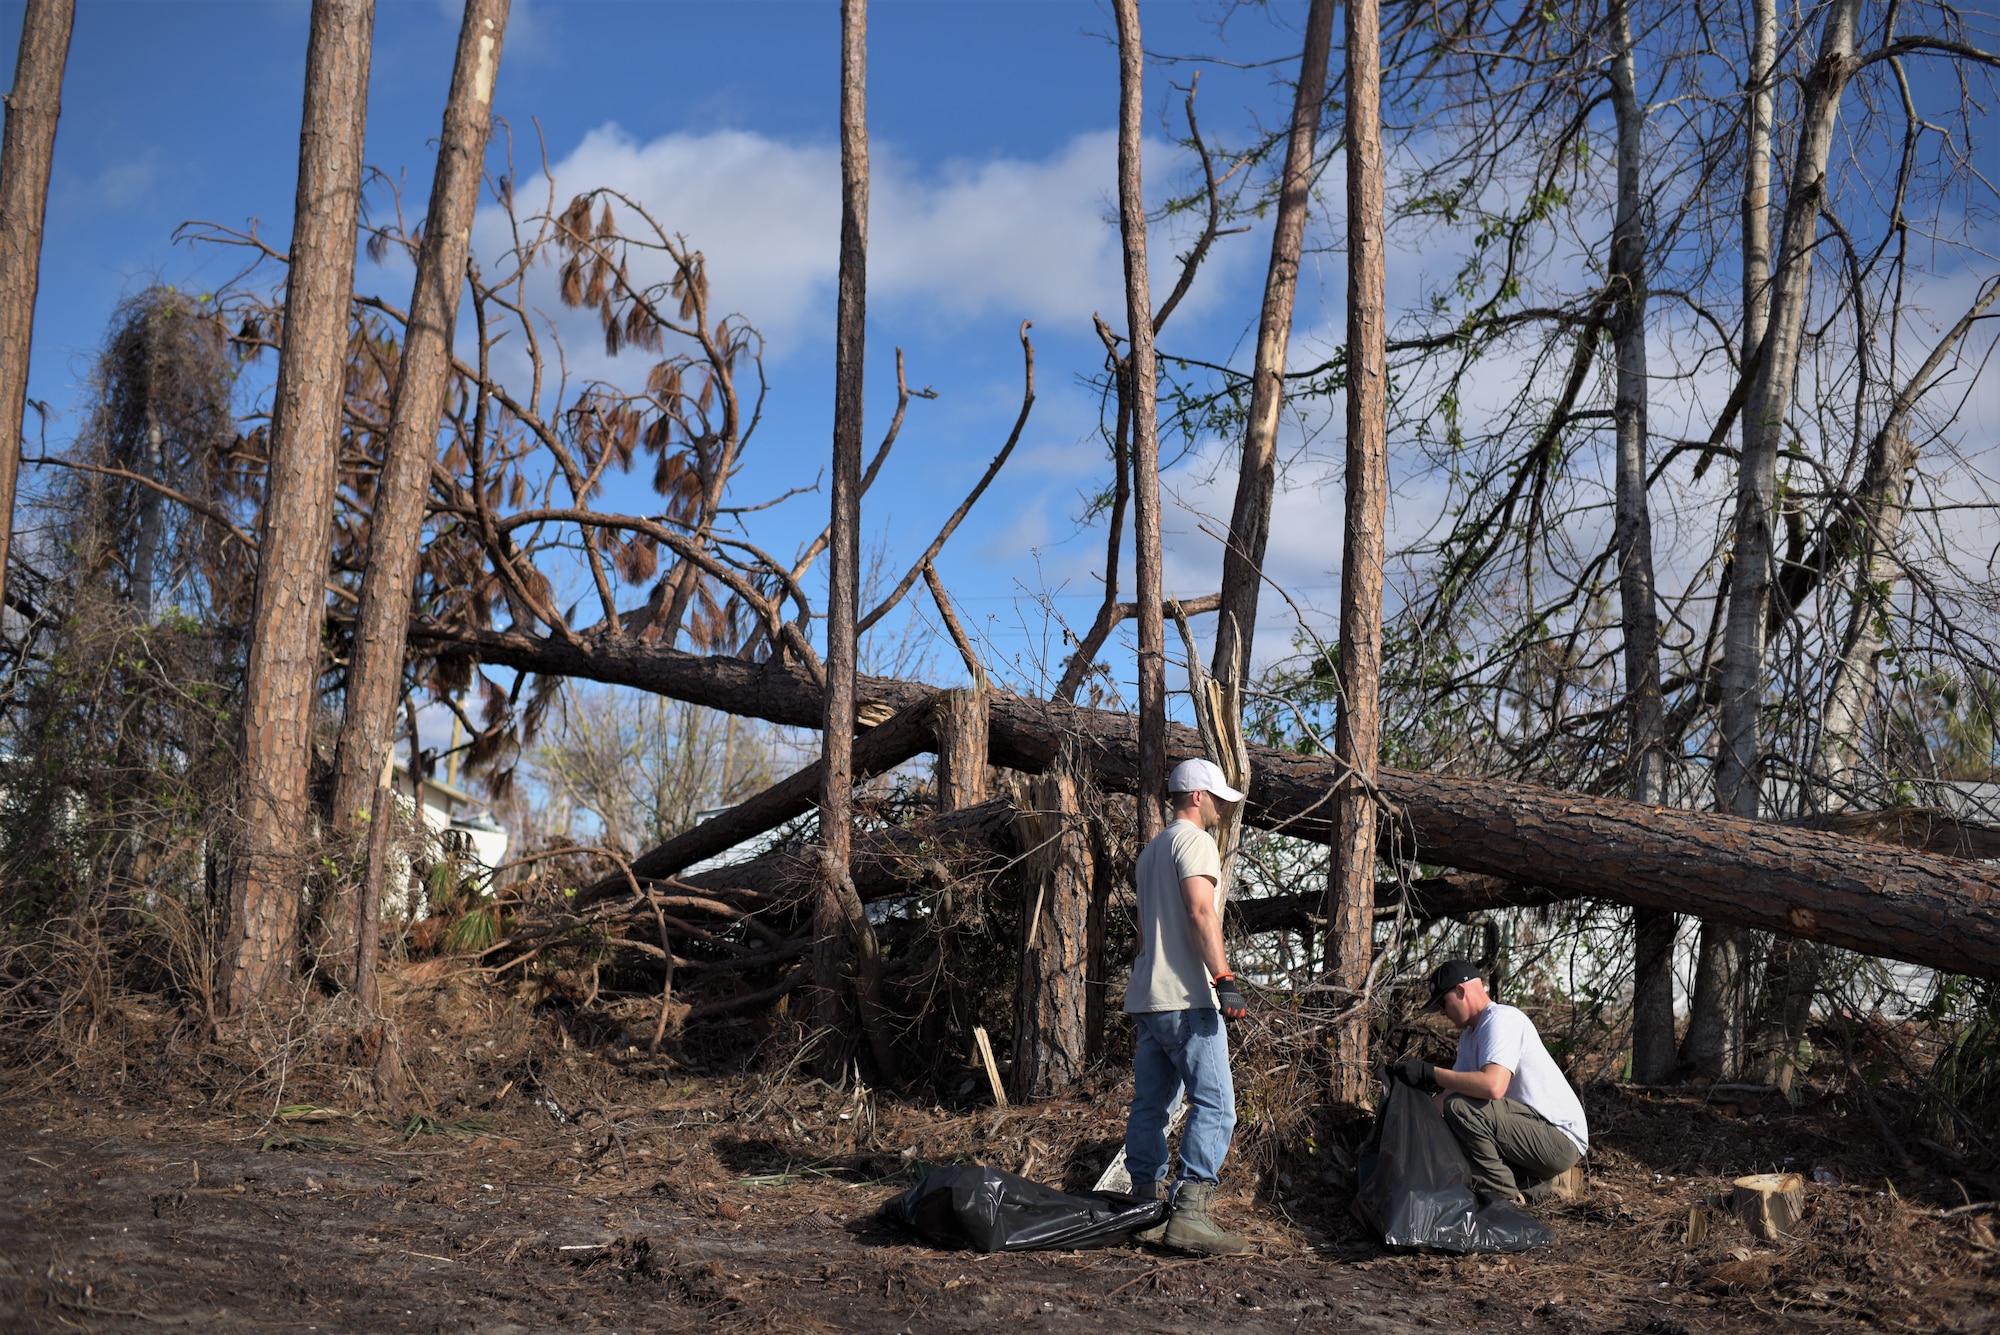 Two volunteers from Tyndall Air Force Base clean debris from Under the Palms Park in Mexico Beach, Fla., Dec. 16, 2018. Thirty nine volunteers from Tyndall and Eglin Air Force Bases came together to help clean of Mexico Beach, one of the communities hit the hardest by Hurricane Michael.  The volunteers were able to clean up more than 40 cubic yards of debris within four hours. (U.S. Air Force photo by Tech. Sgt. Sara Keller)